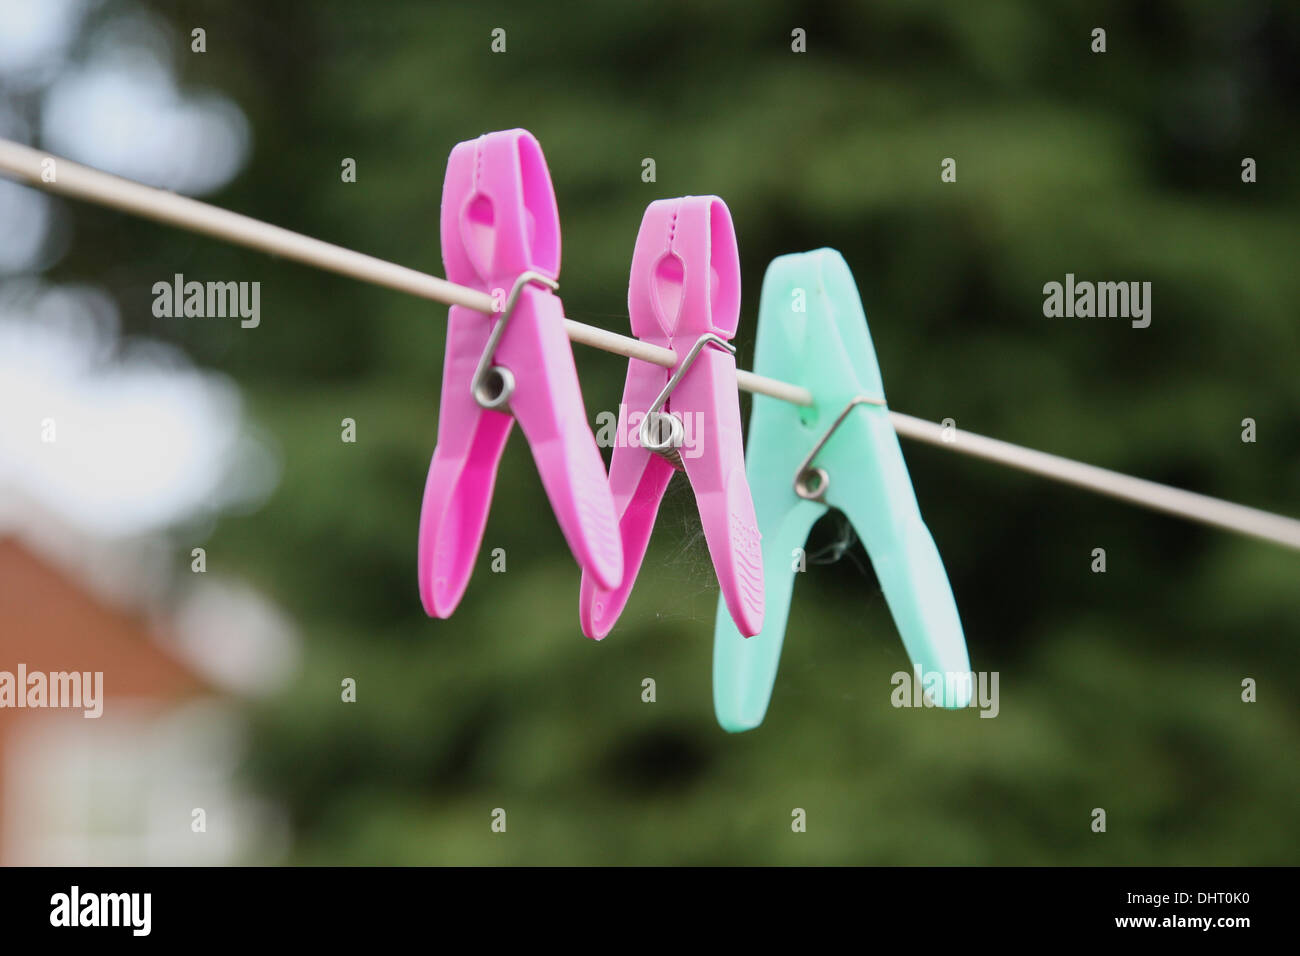 Plastic pegs and cobwebs on a washing line against green background. Stock Photo